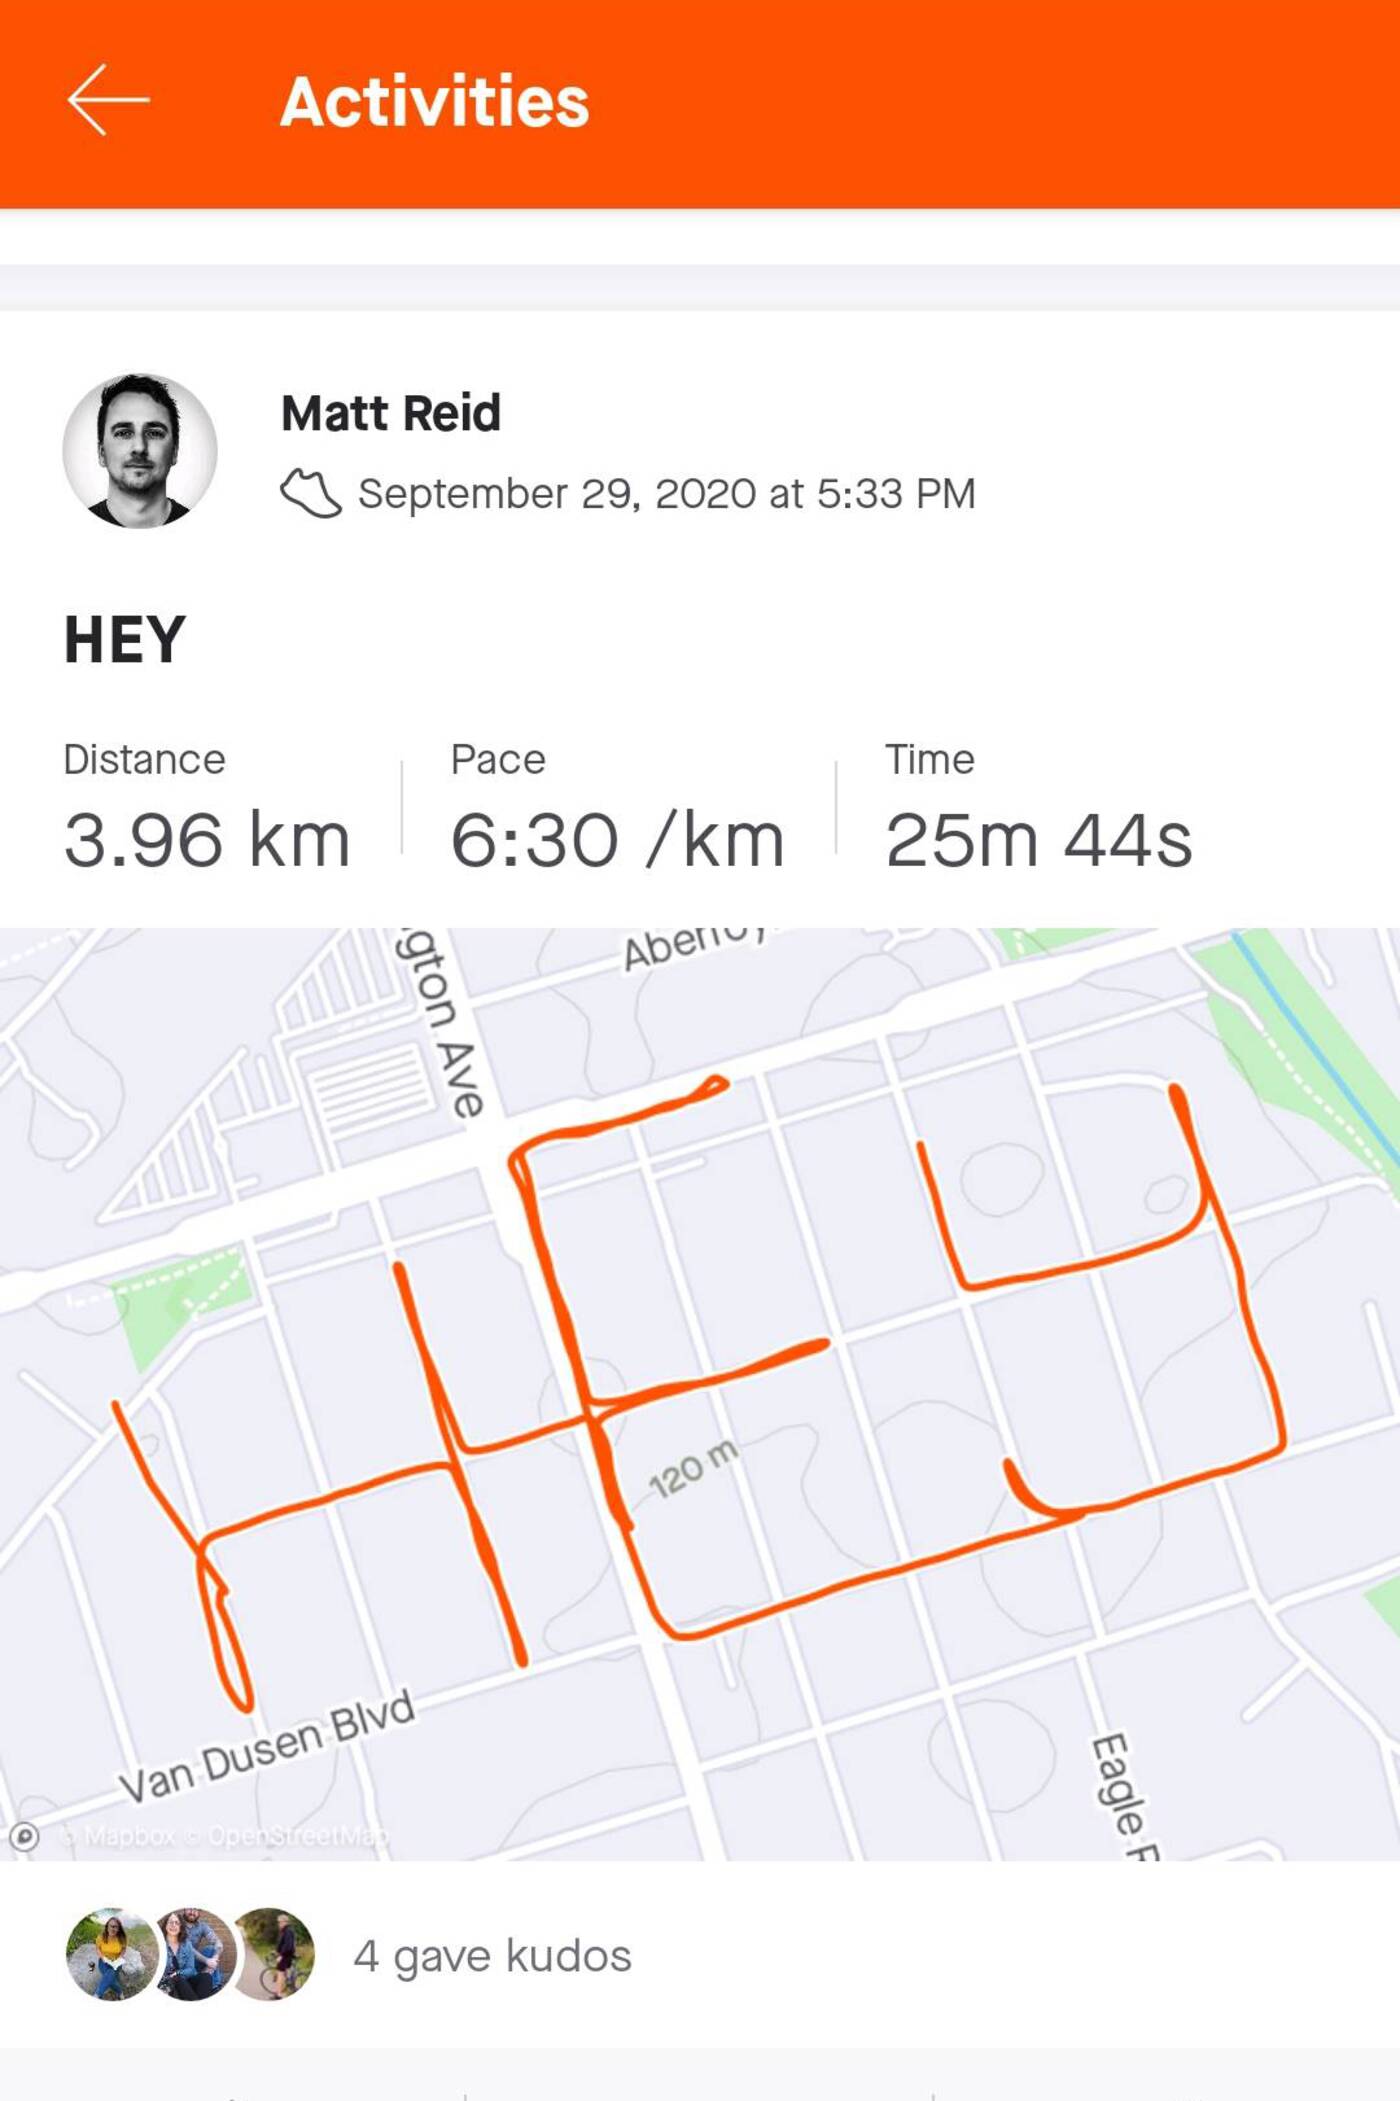 Someone in Toronto has created a dating app that's basically 'Love is Blind